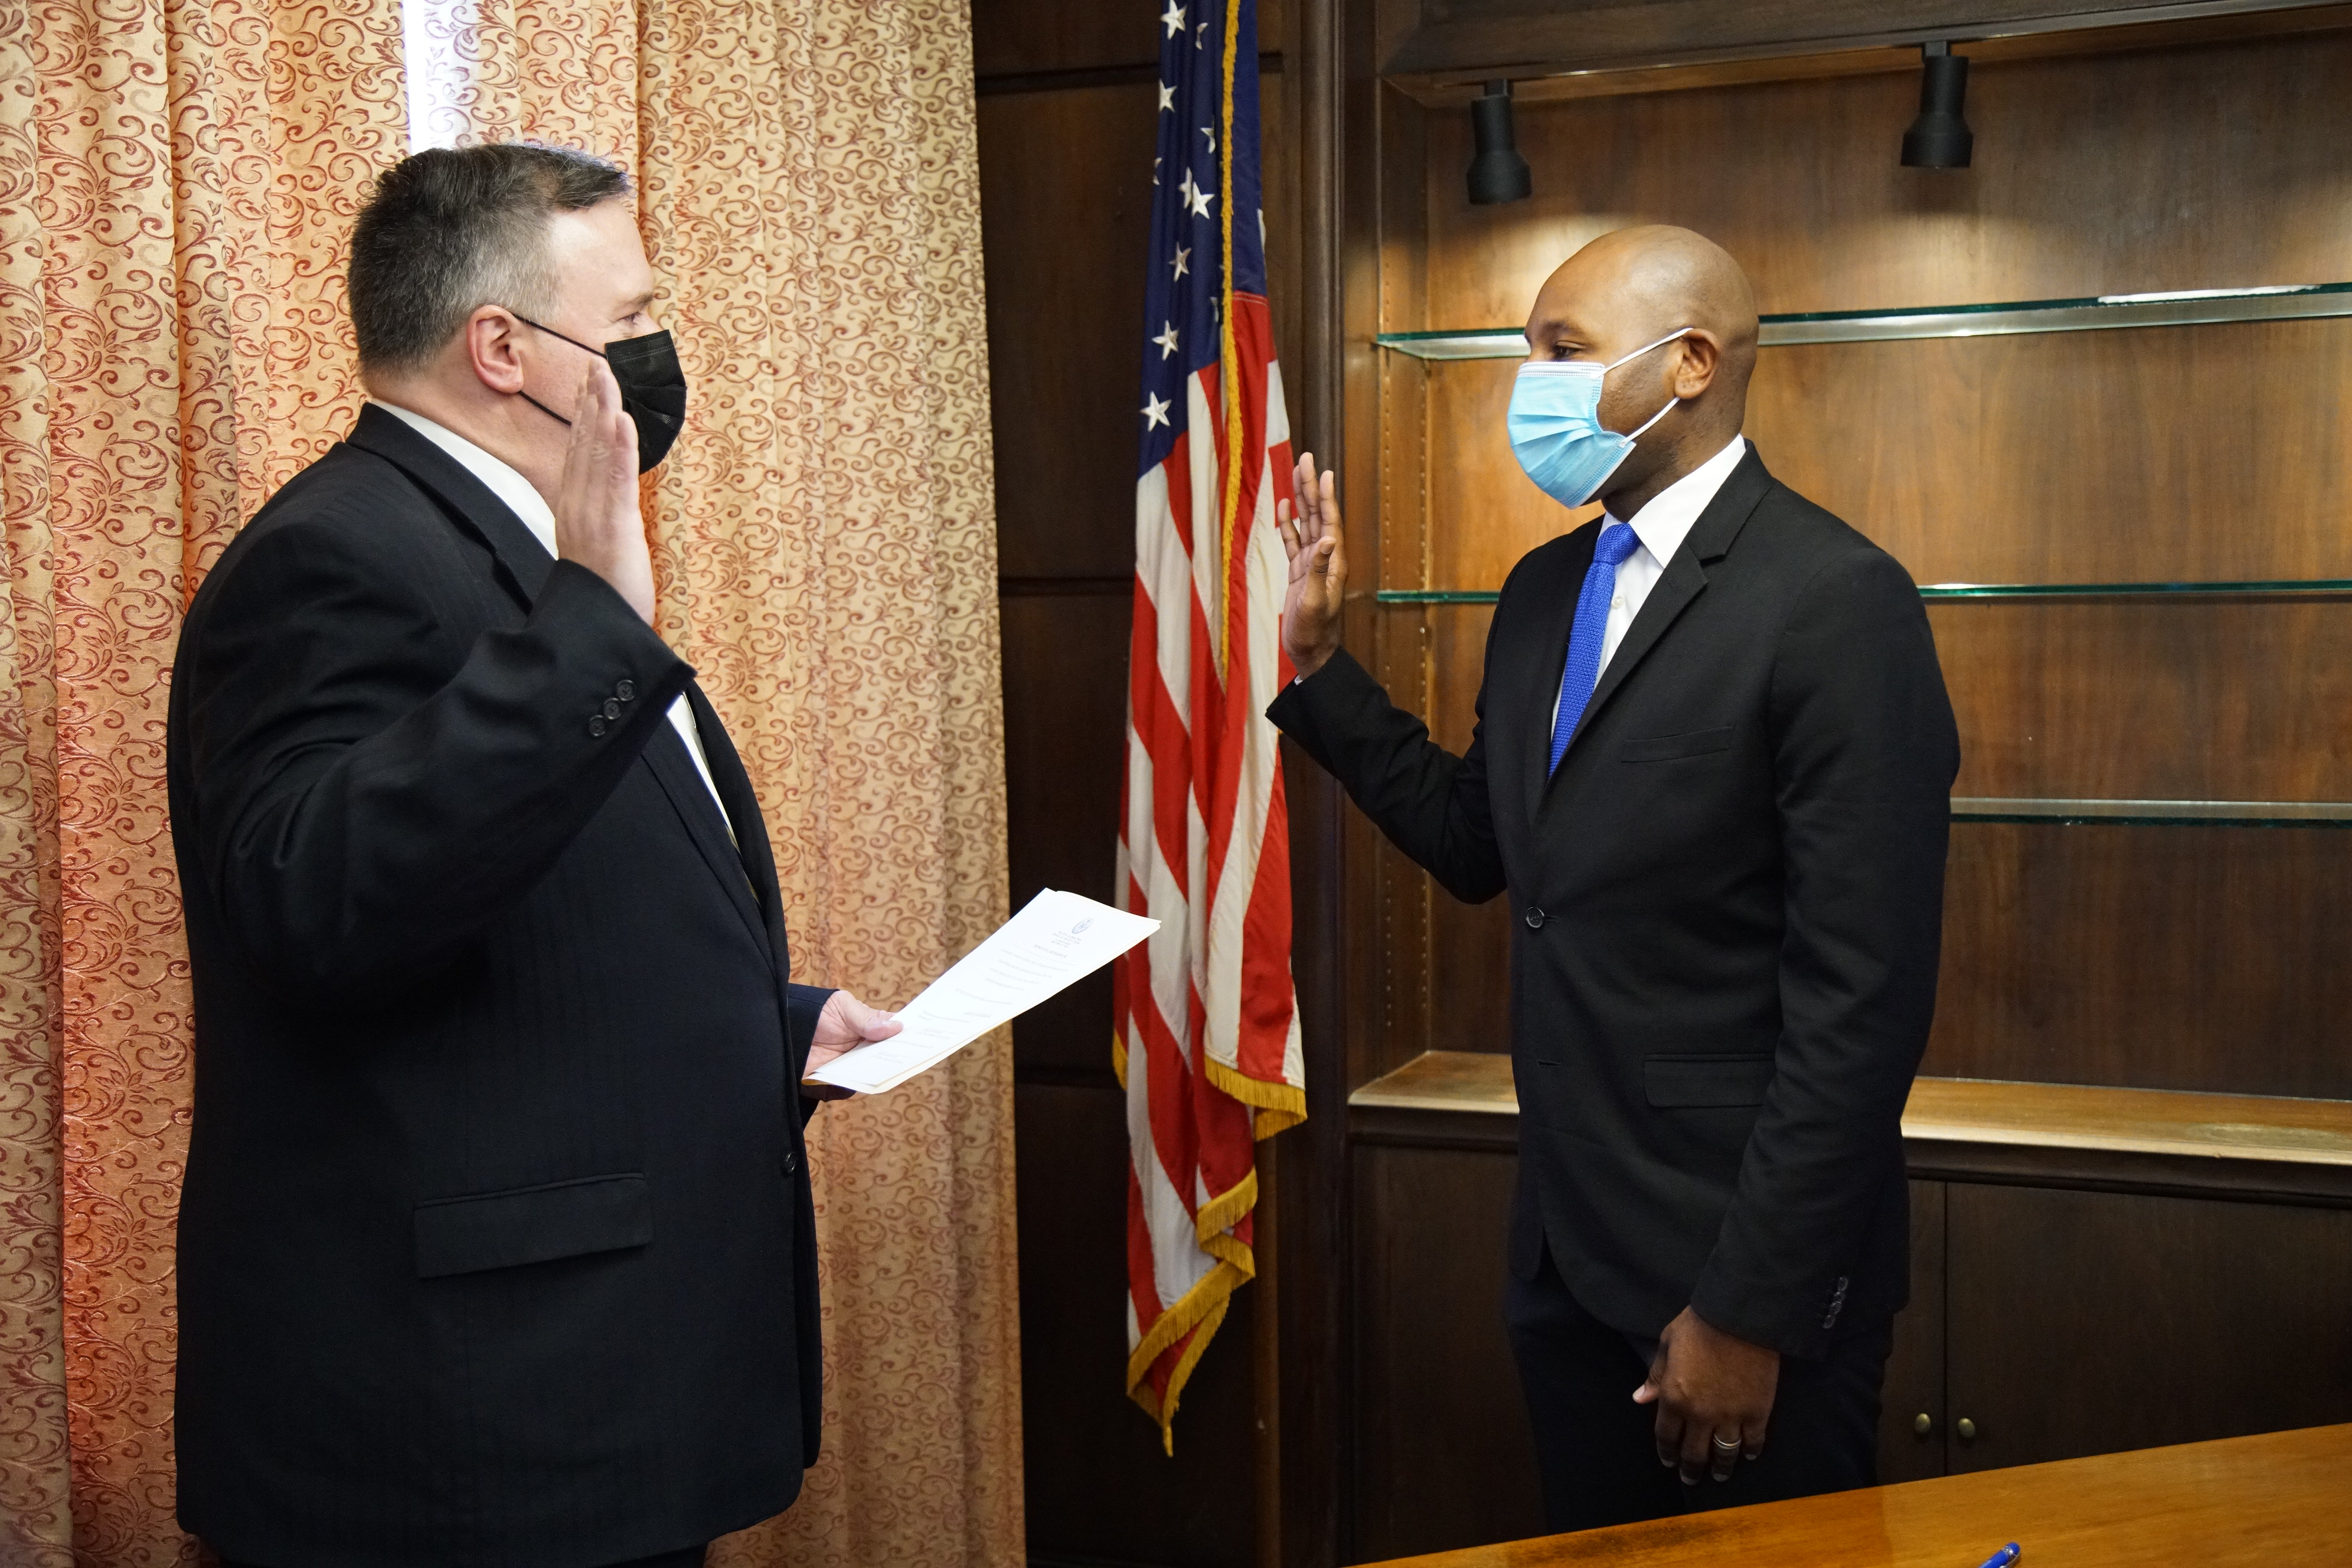 Donovan Richards Becomes First Black Borough President Of Queens In Office's 122-Year History